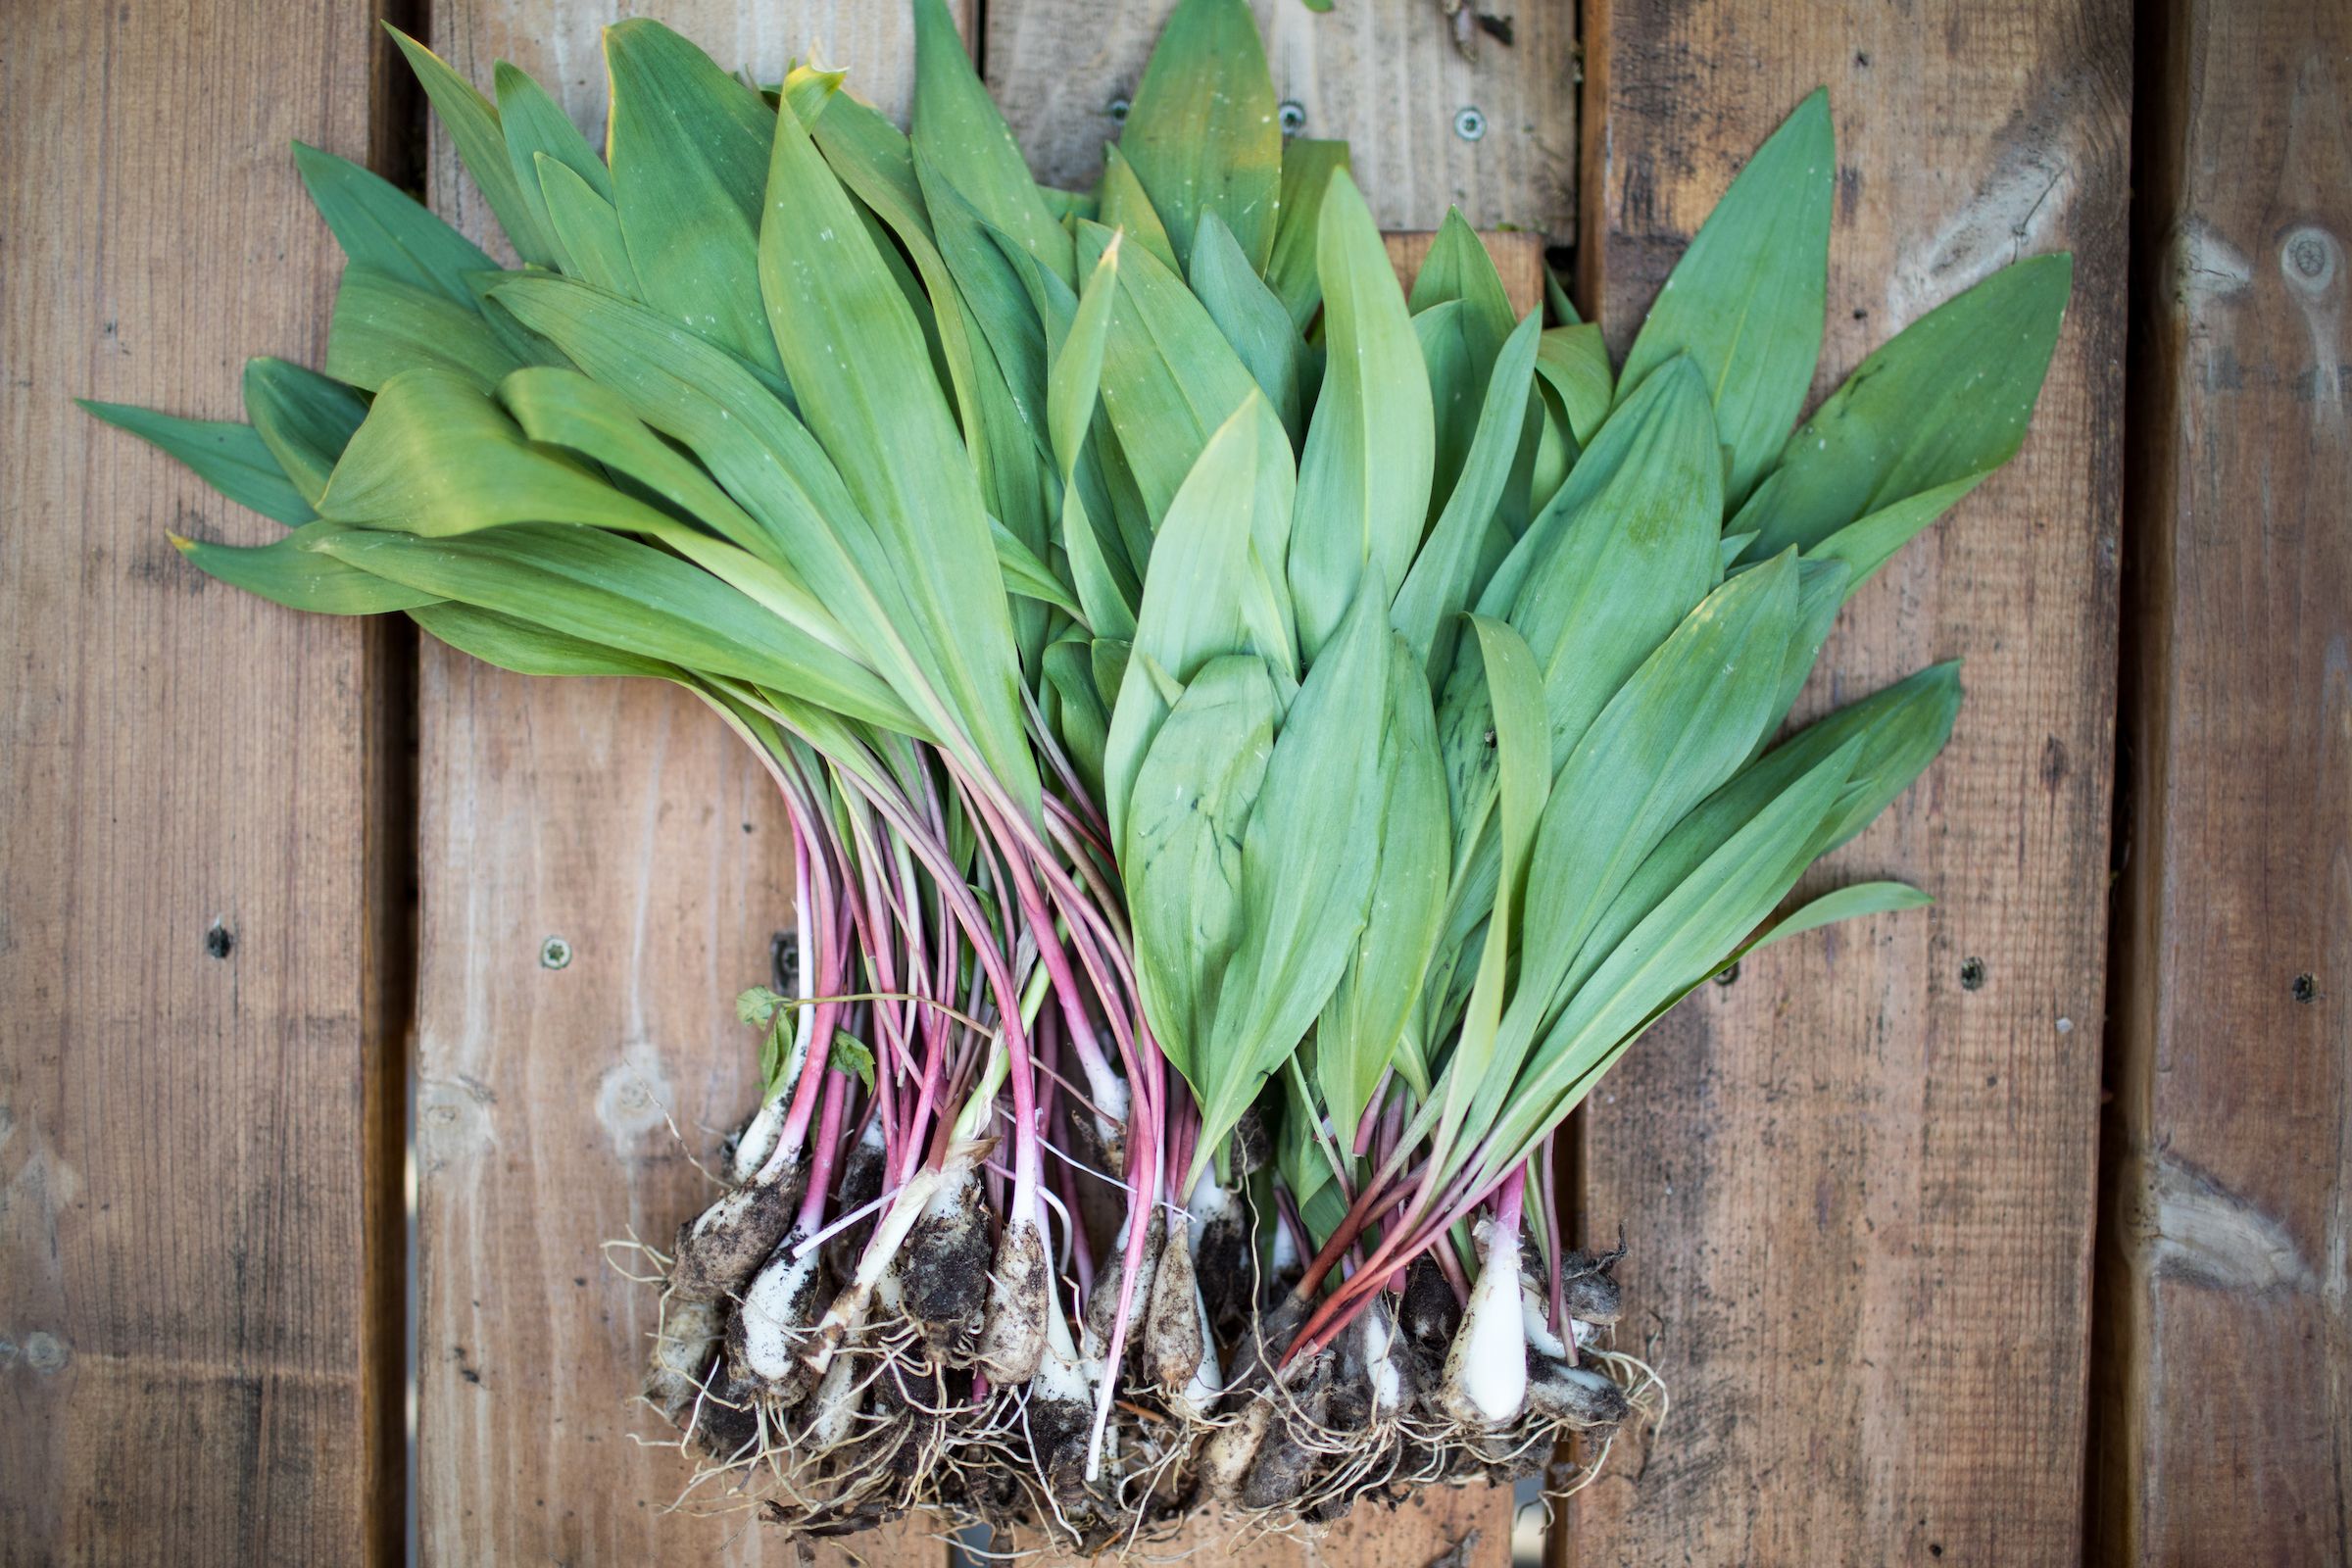 Best Green Onion Substitute (15+ Amazingly Easy Alternatives To Use!)